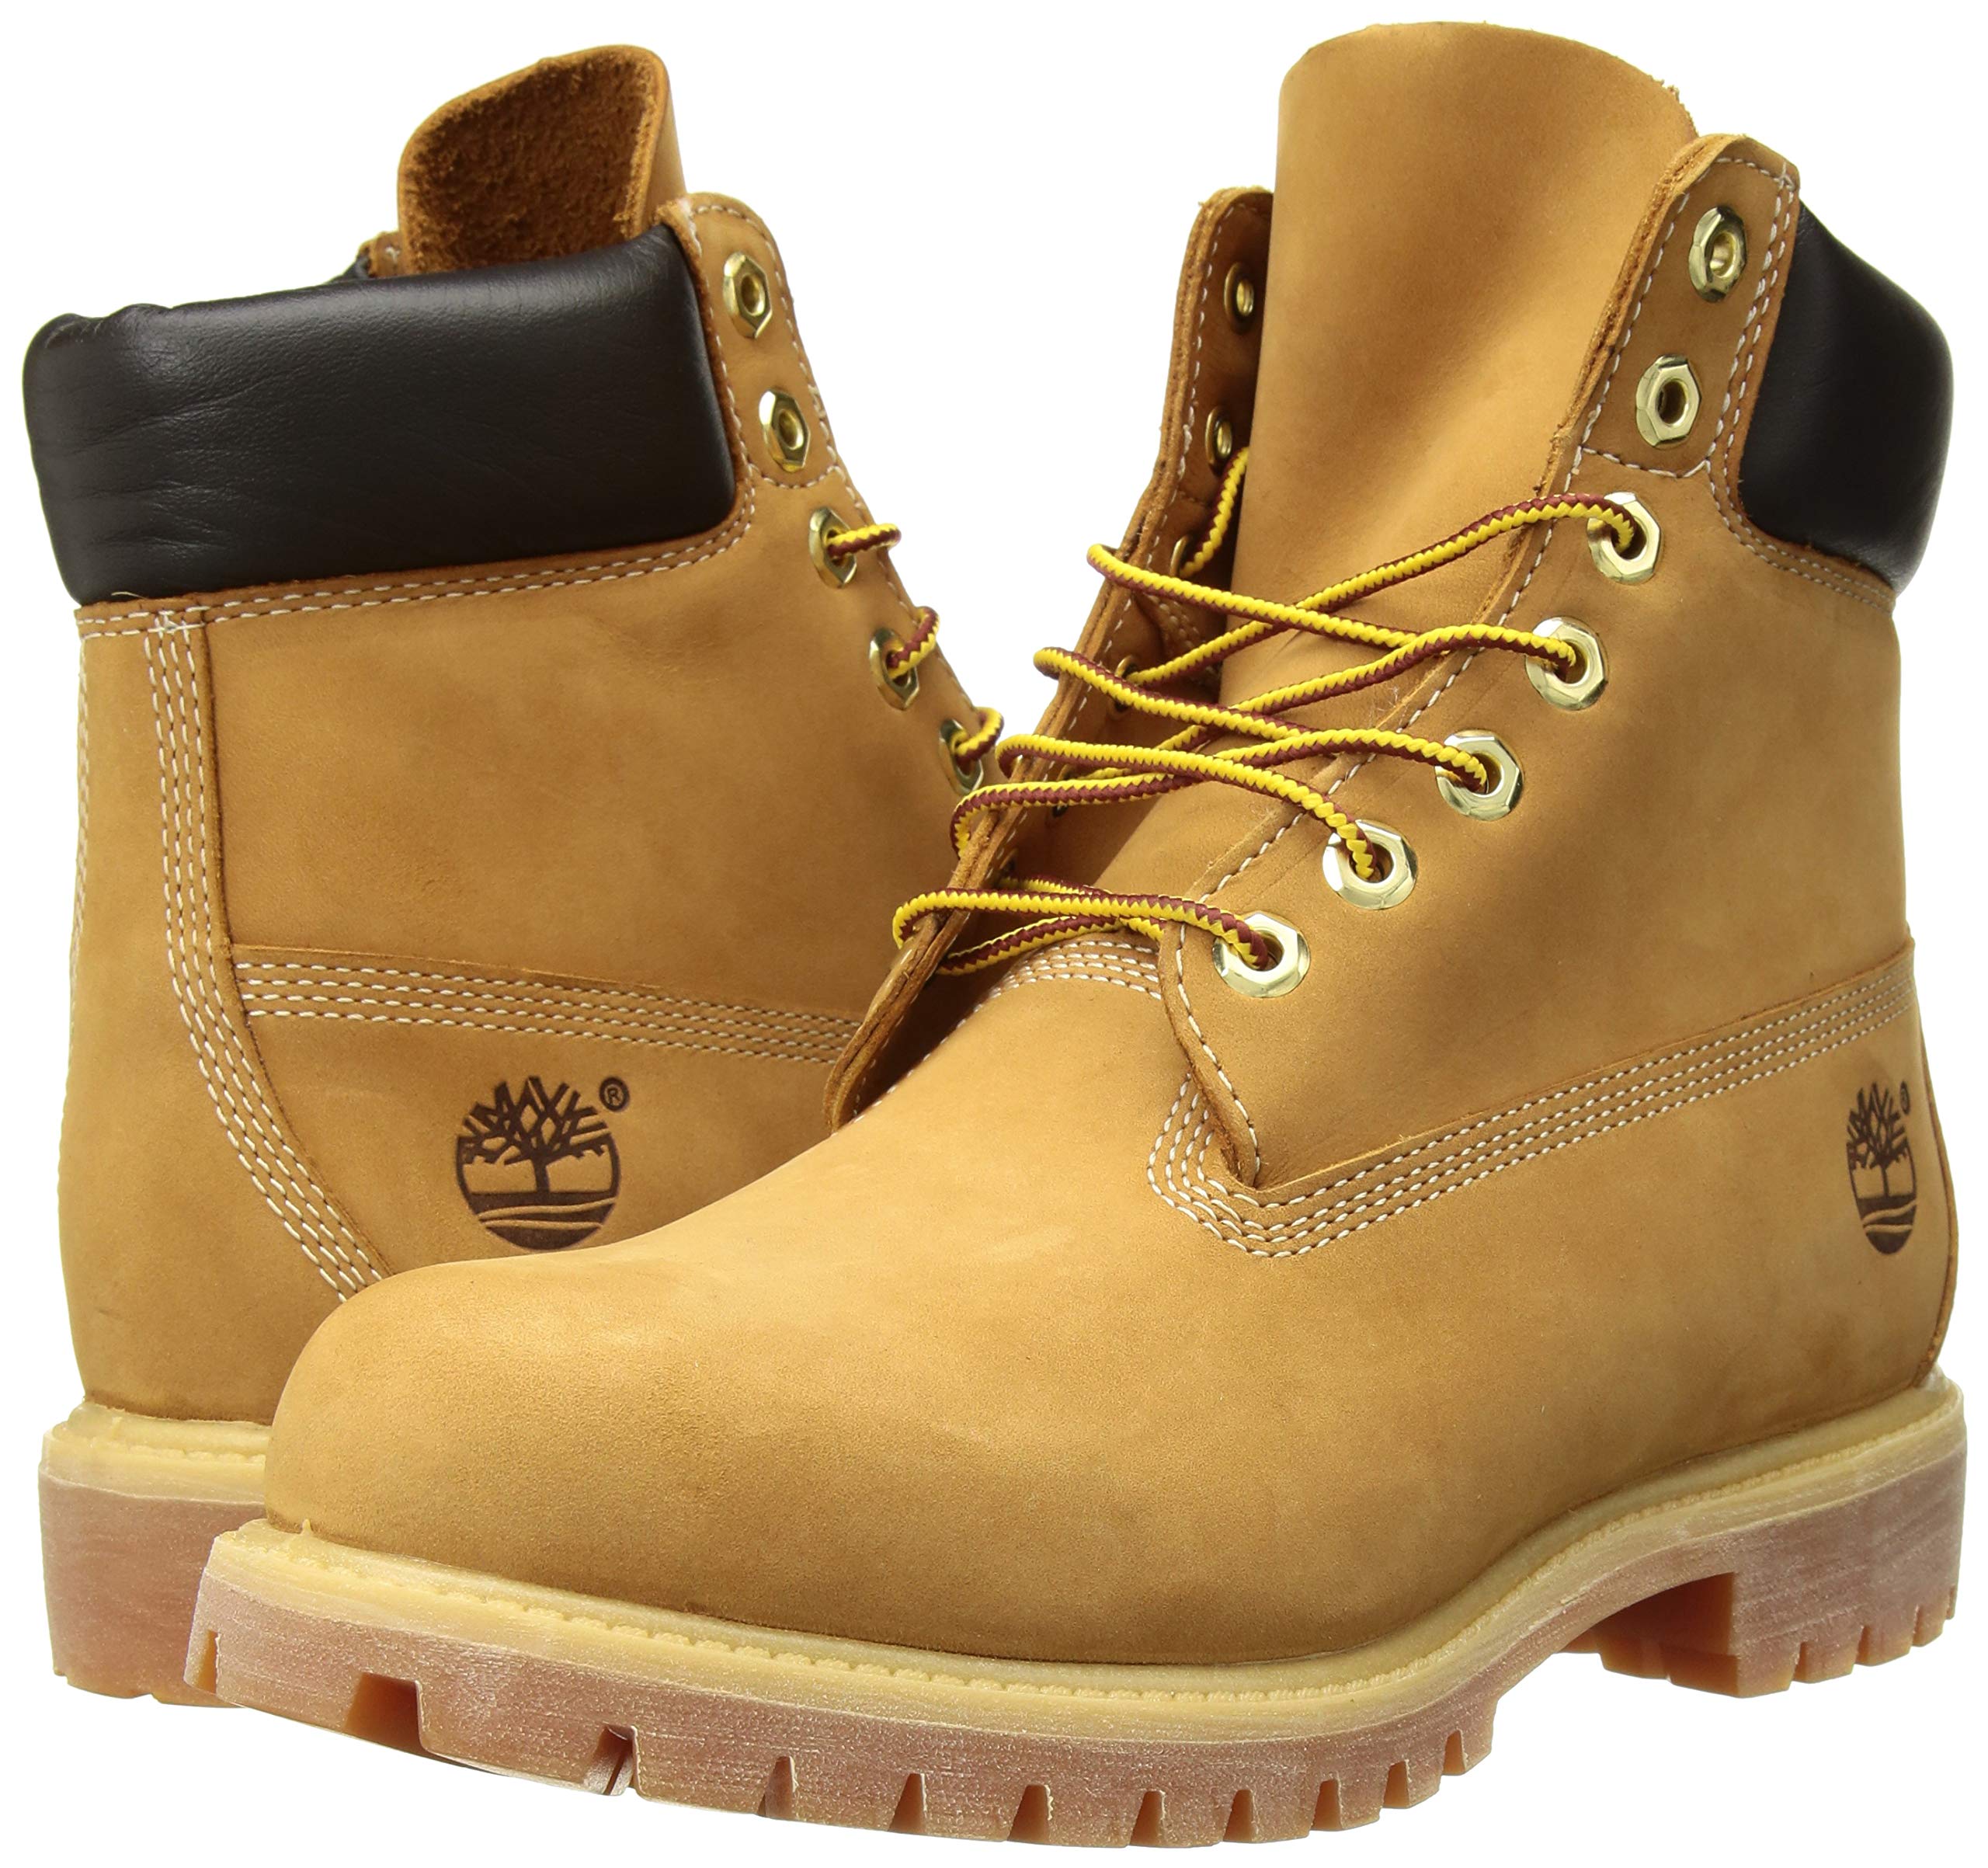 Timberland Men's Ankle Boots, 53 EU